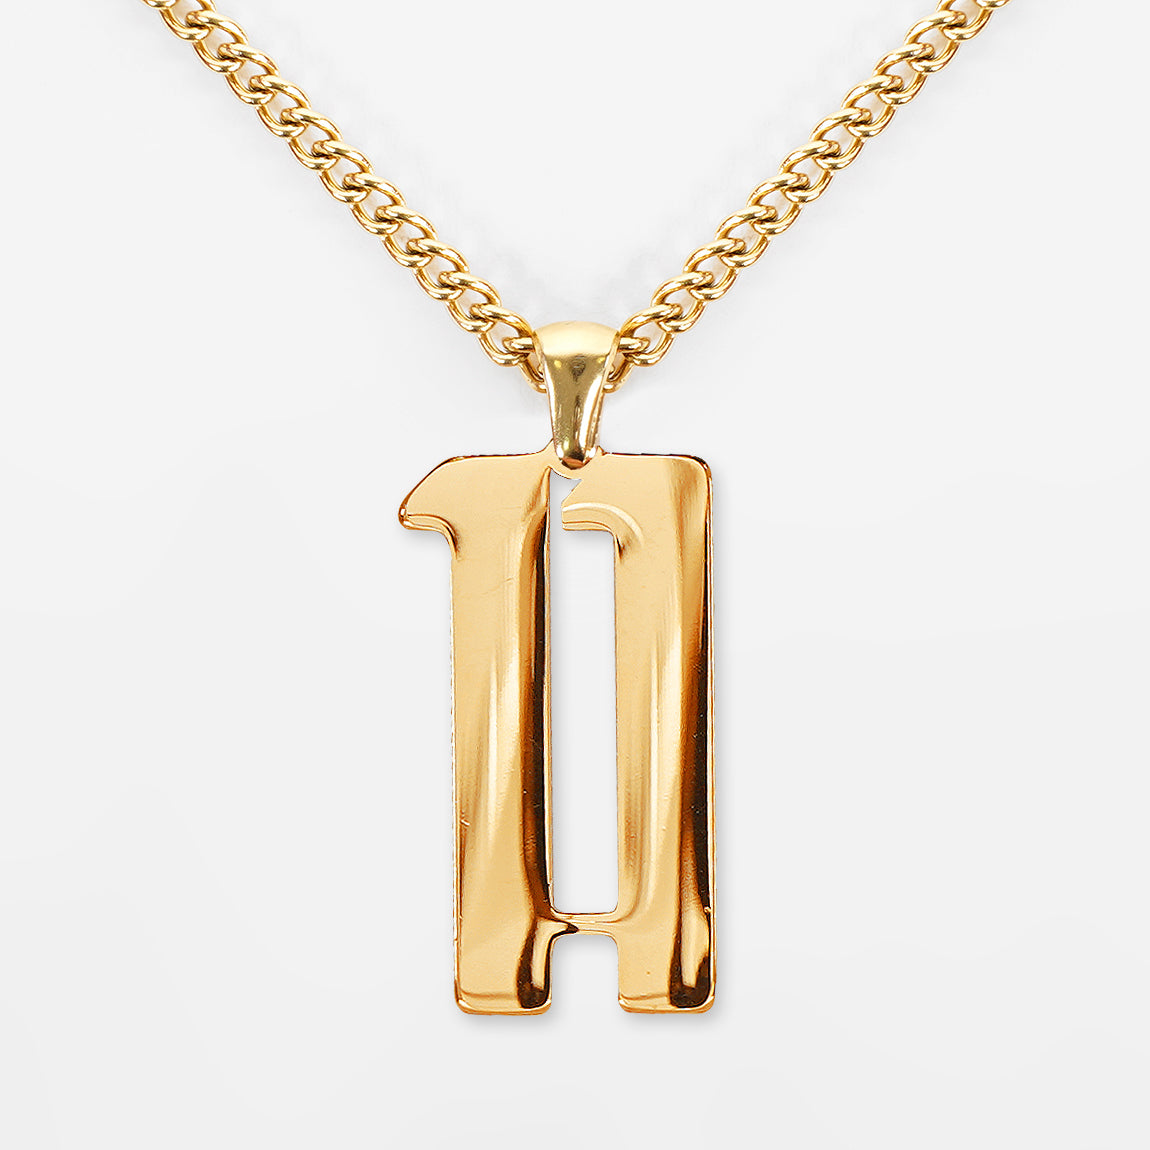 Trendy Stainless Steel Basketball Letter Necklace 26 Letter Gold